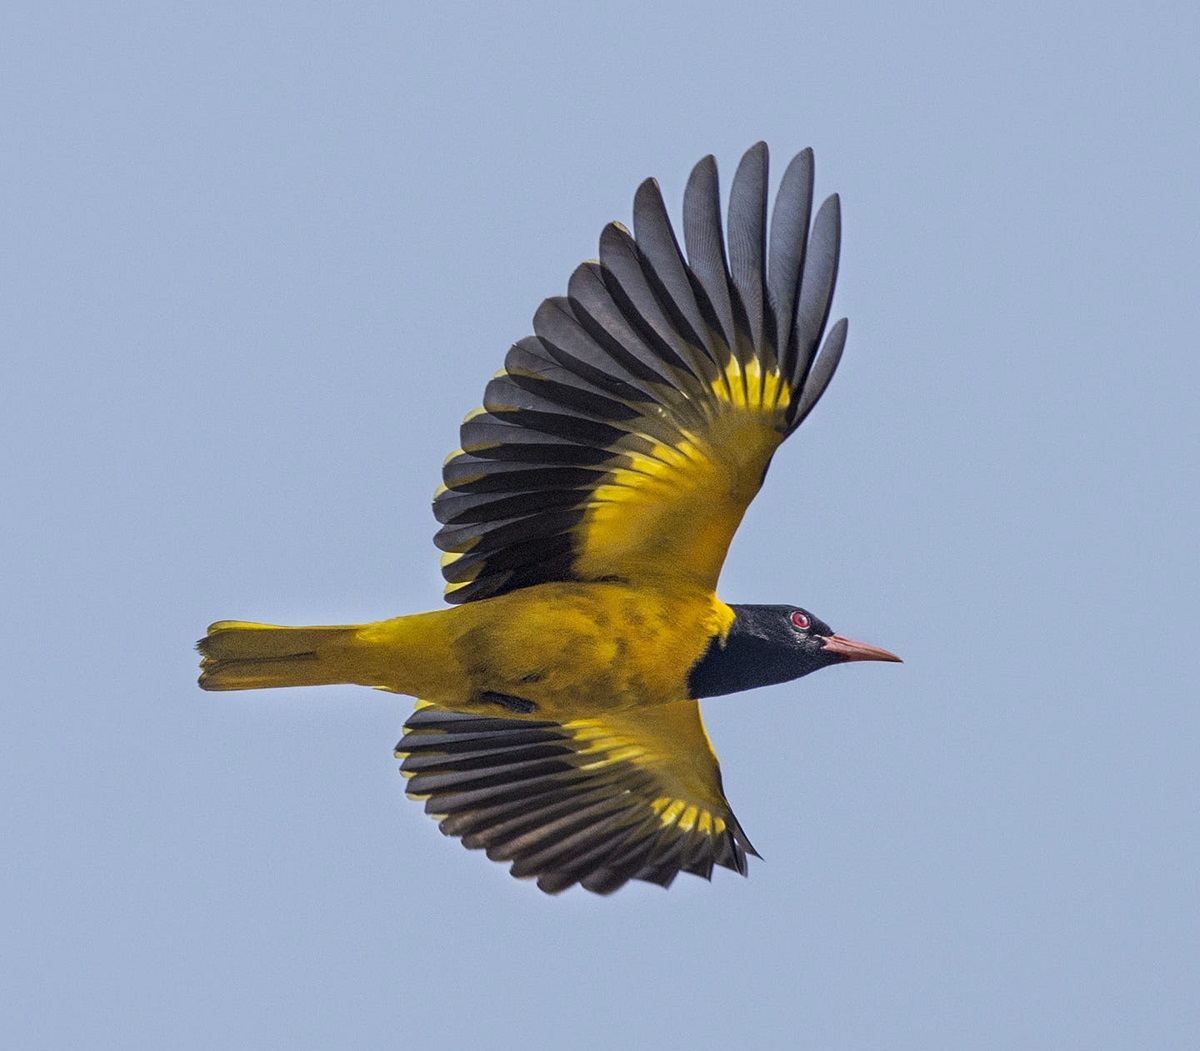 Oriole migrating